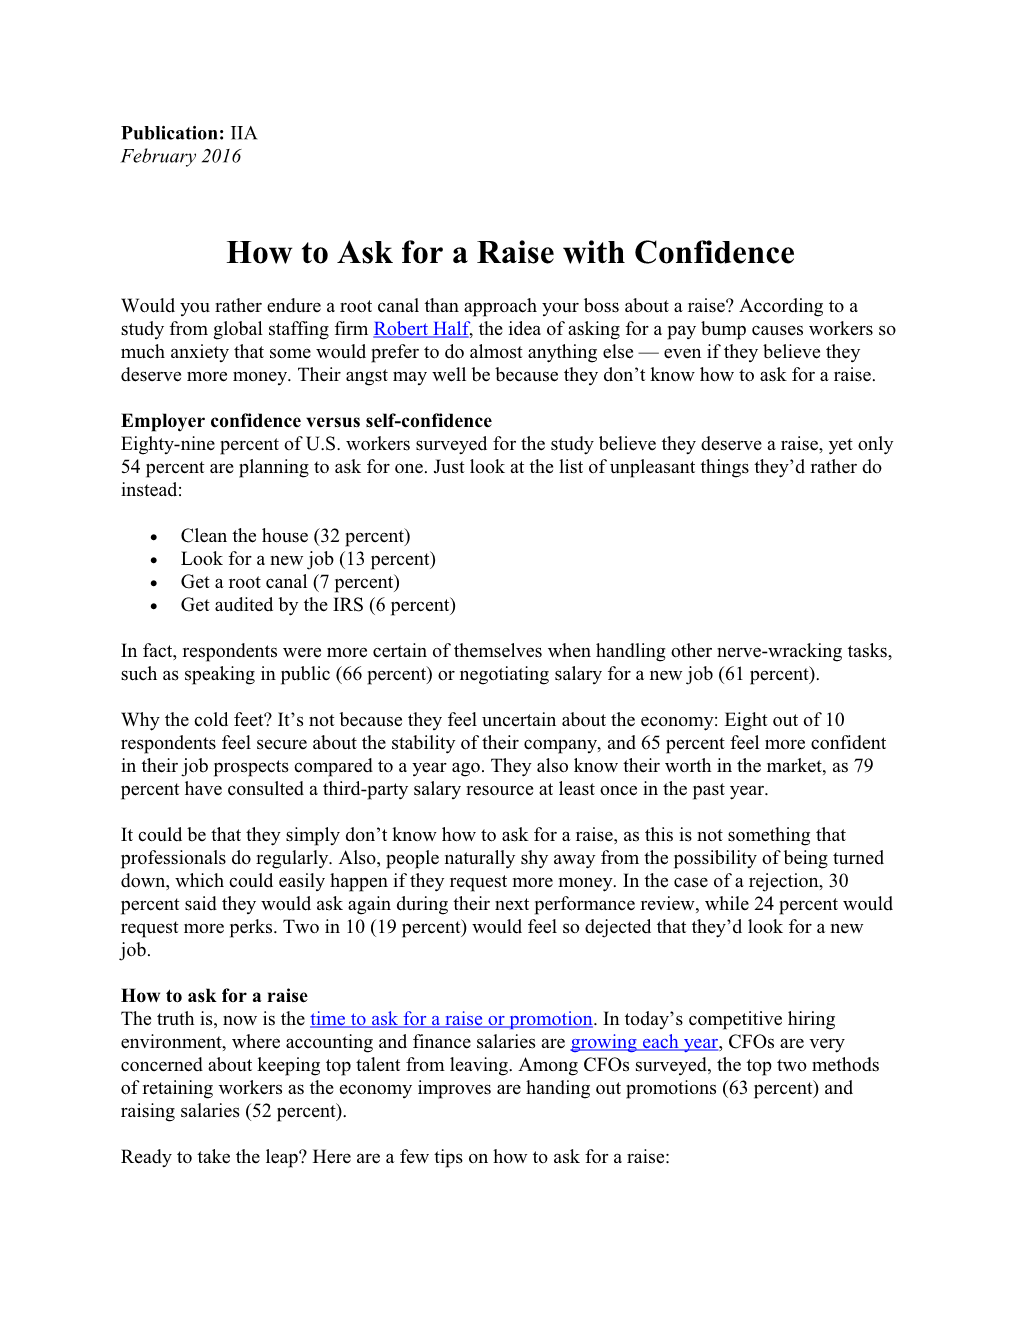 How to Ask for a Raise with Confidence